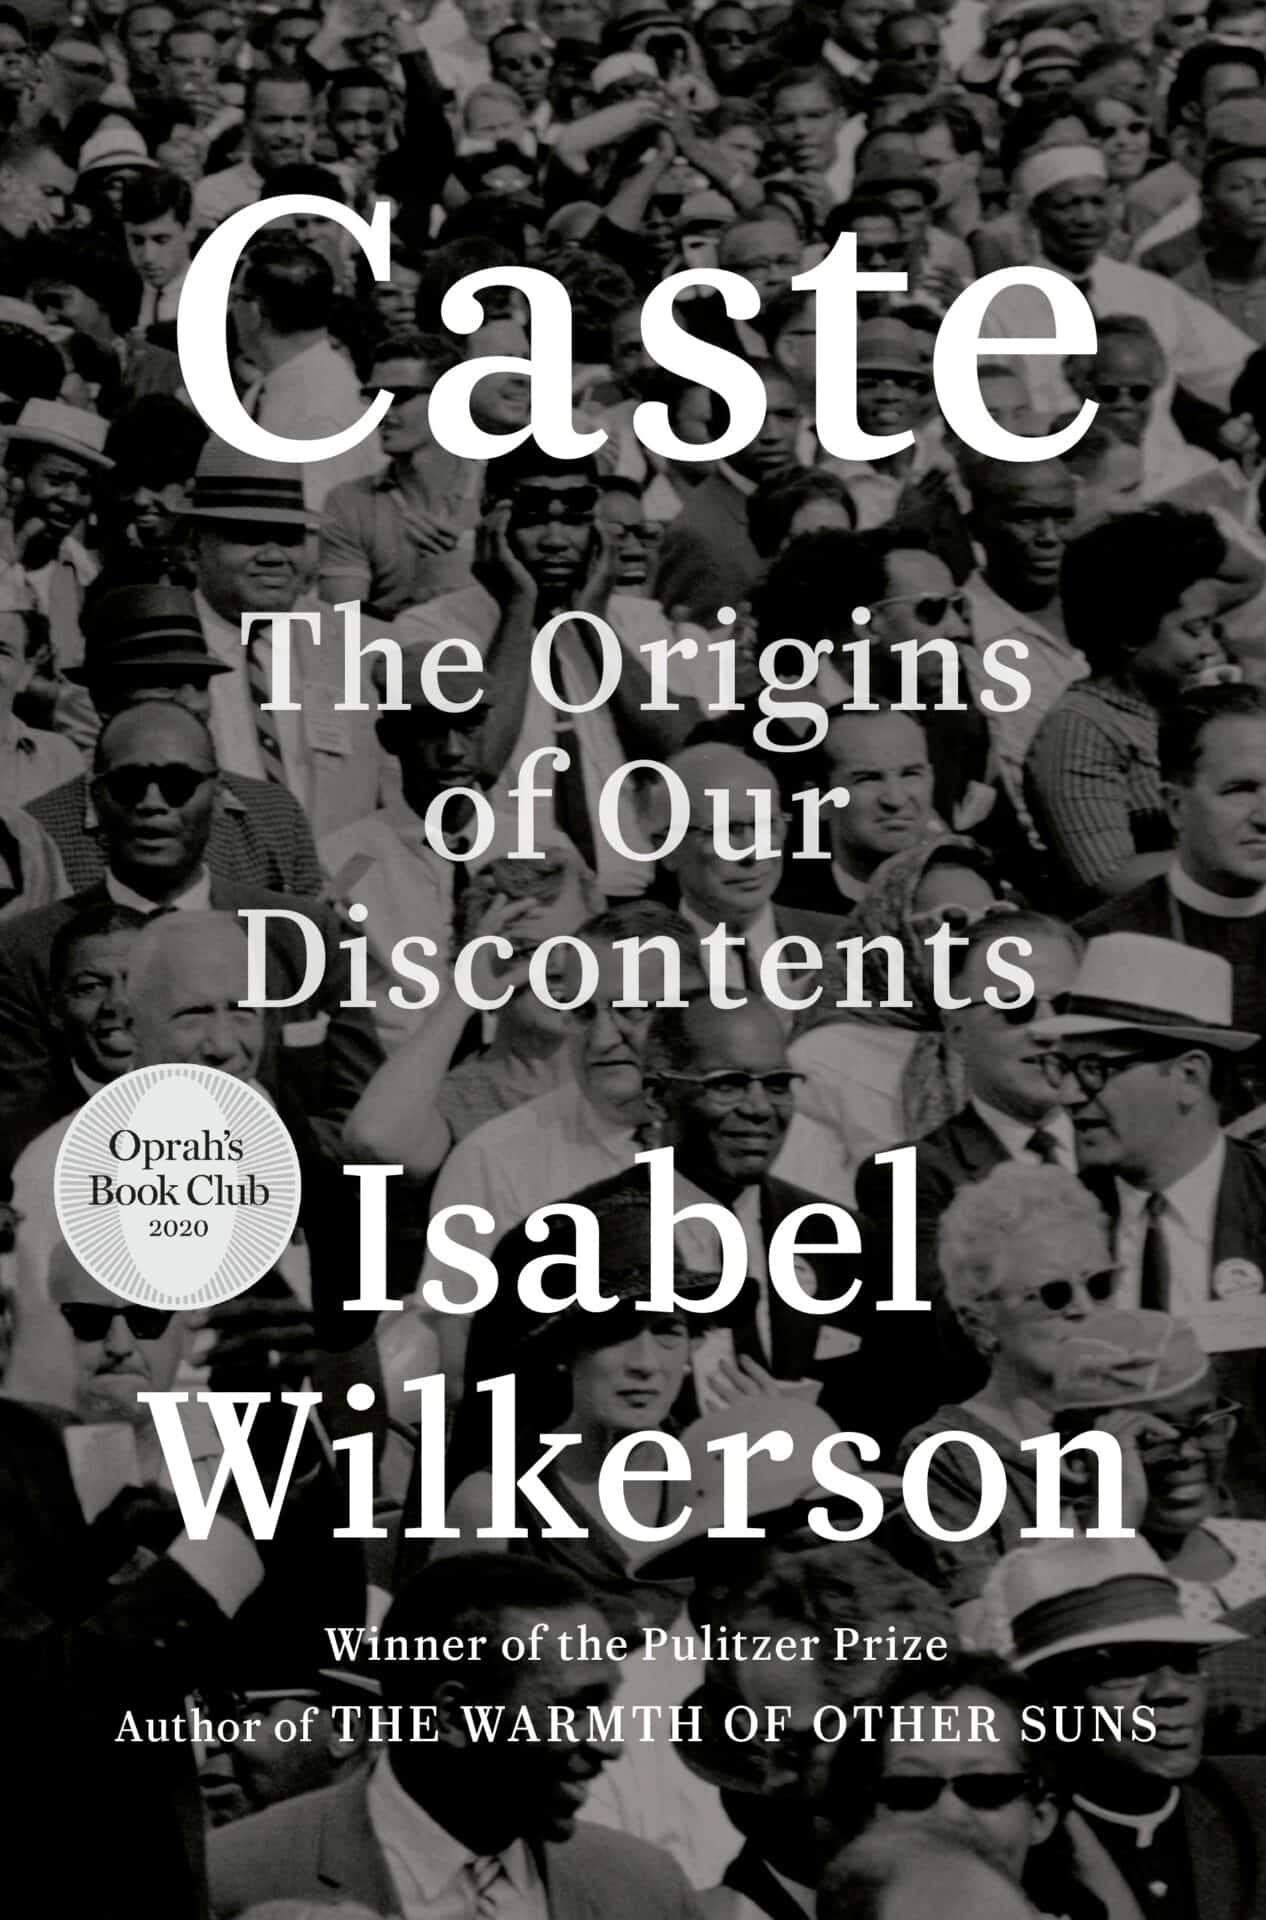 Pulitzer Prize winner and National Humanities Medal recipient Isabel Wilkerson presents a talk on her New York Times bestseller and critically acclaimed book Caste.